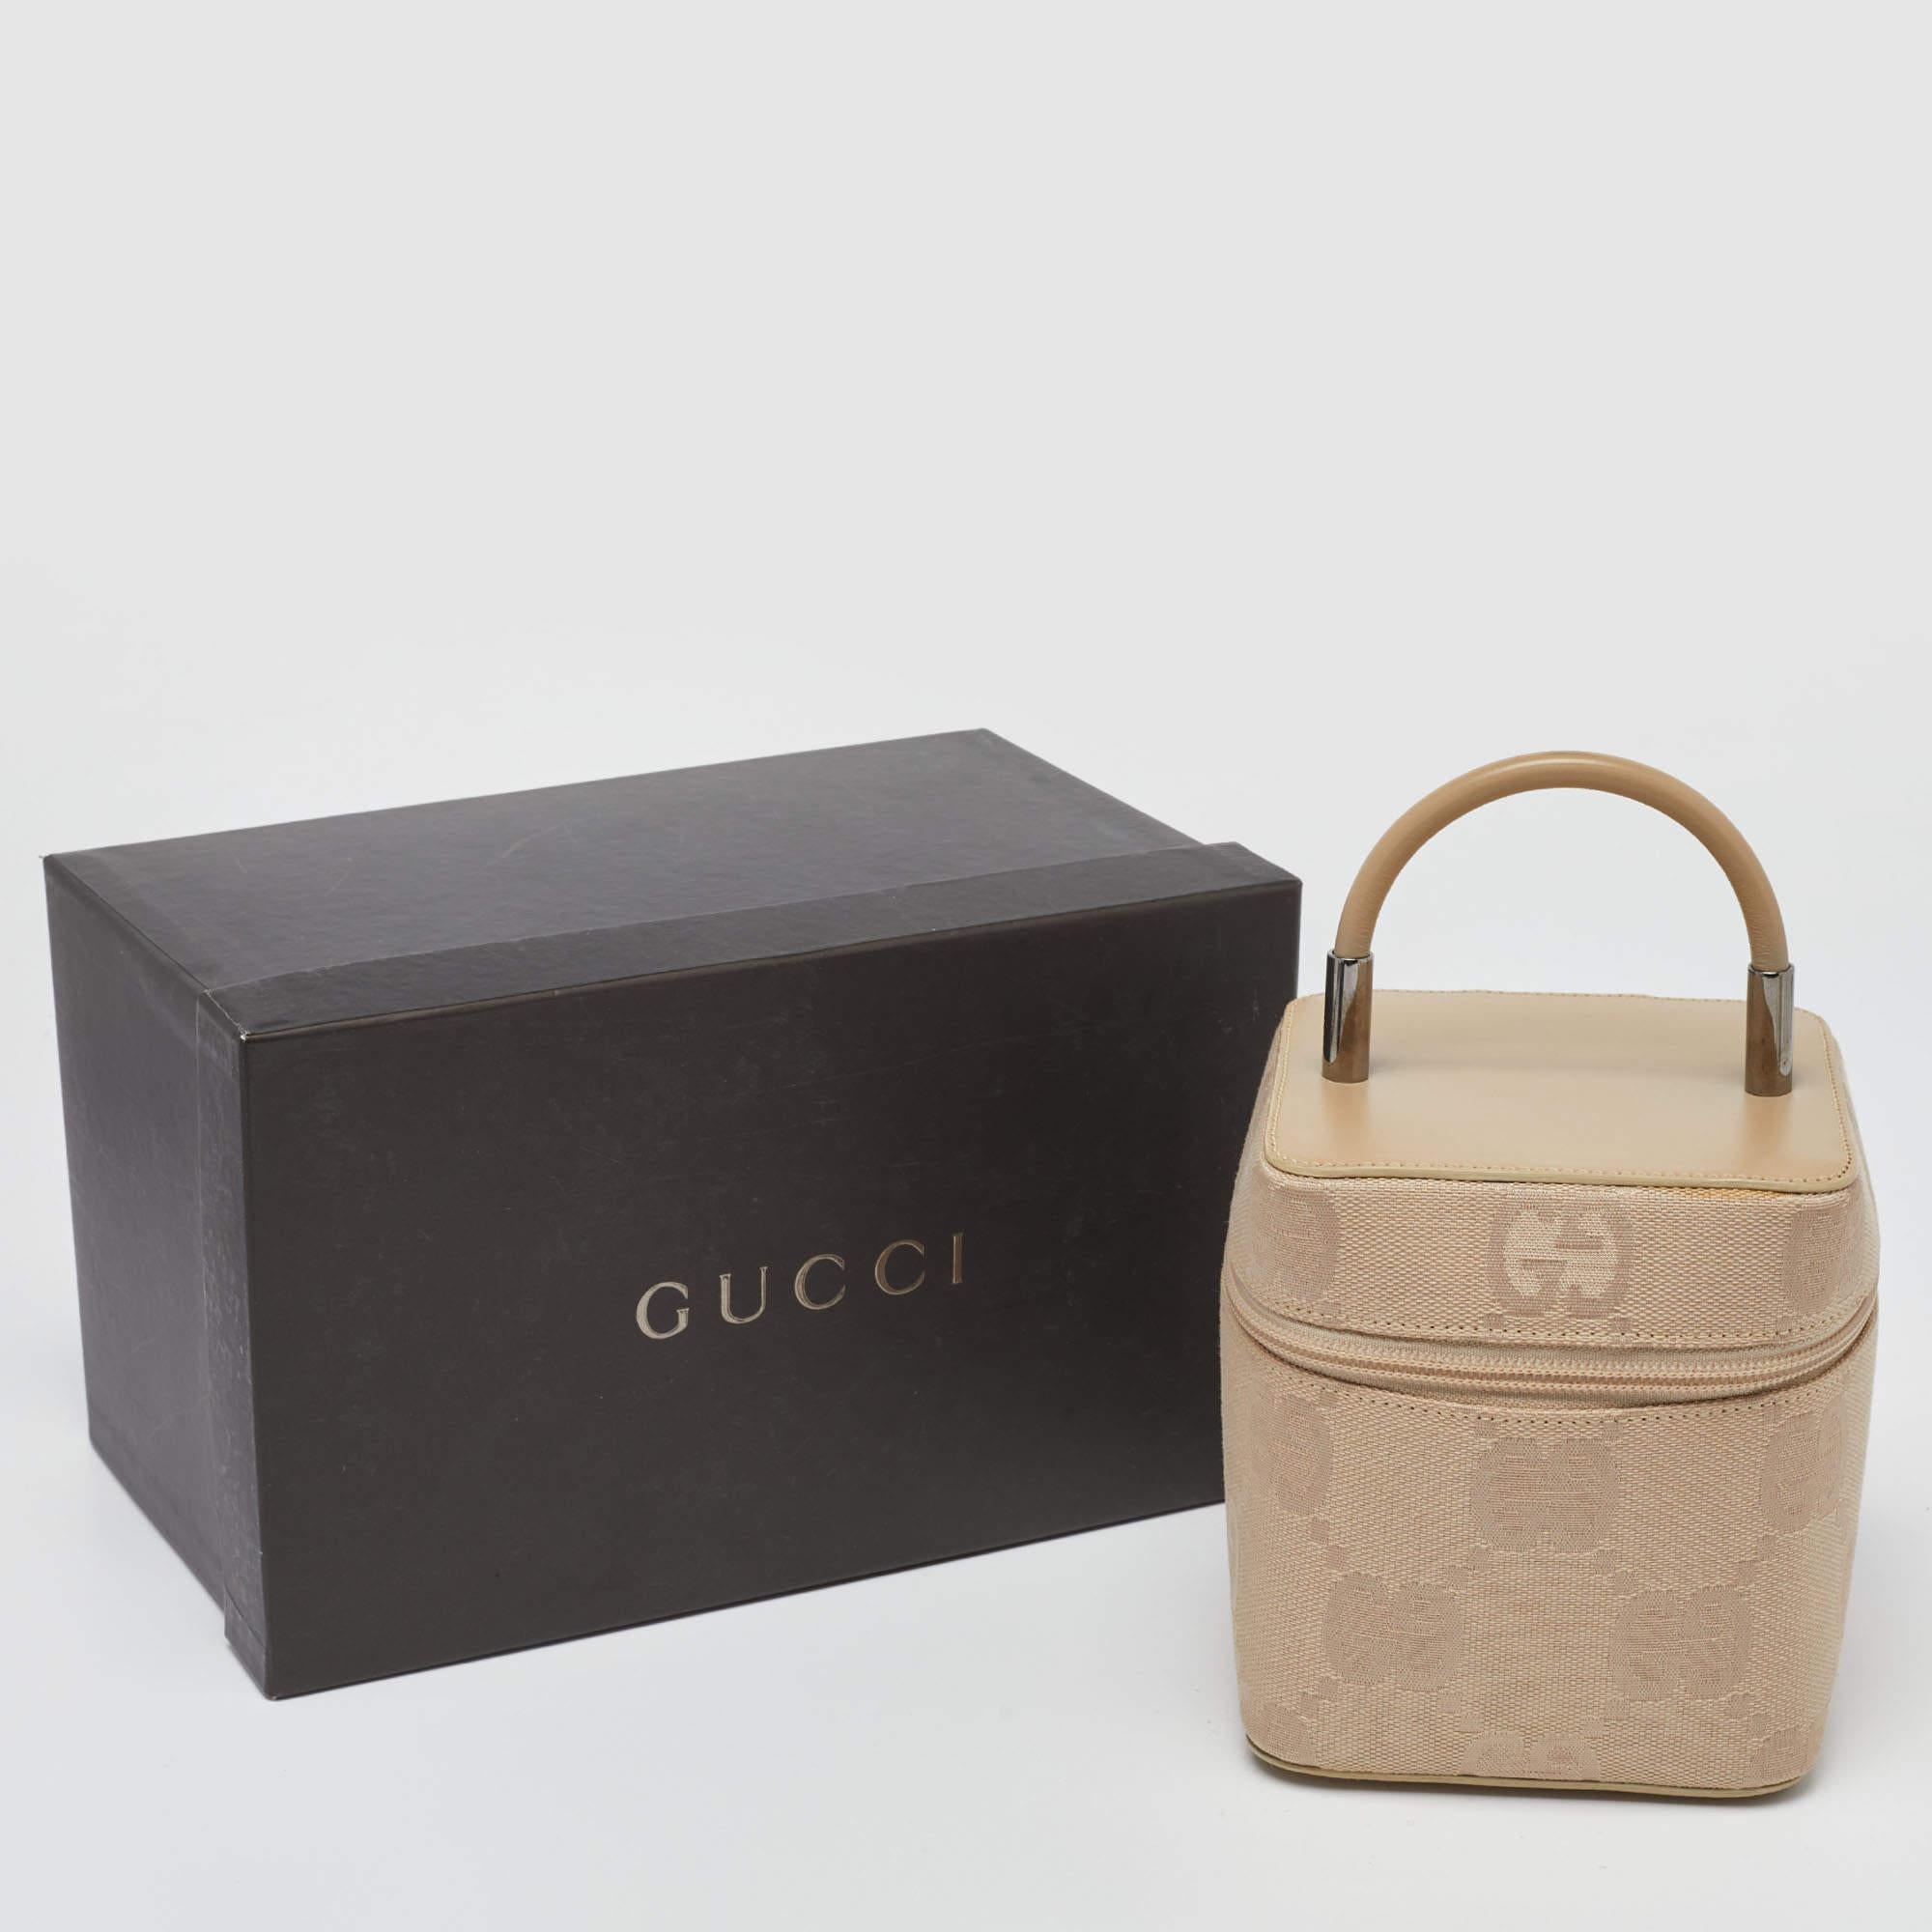 Gucci Beige GG Canvas and Leather Vanity Bag 8